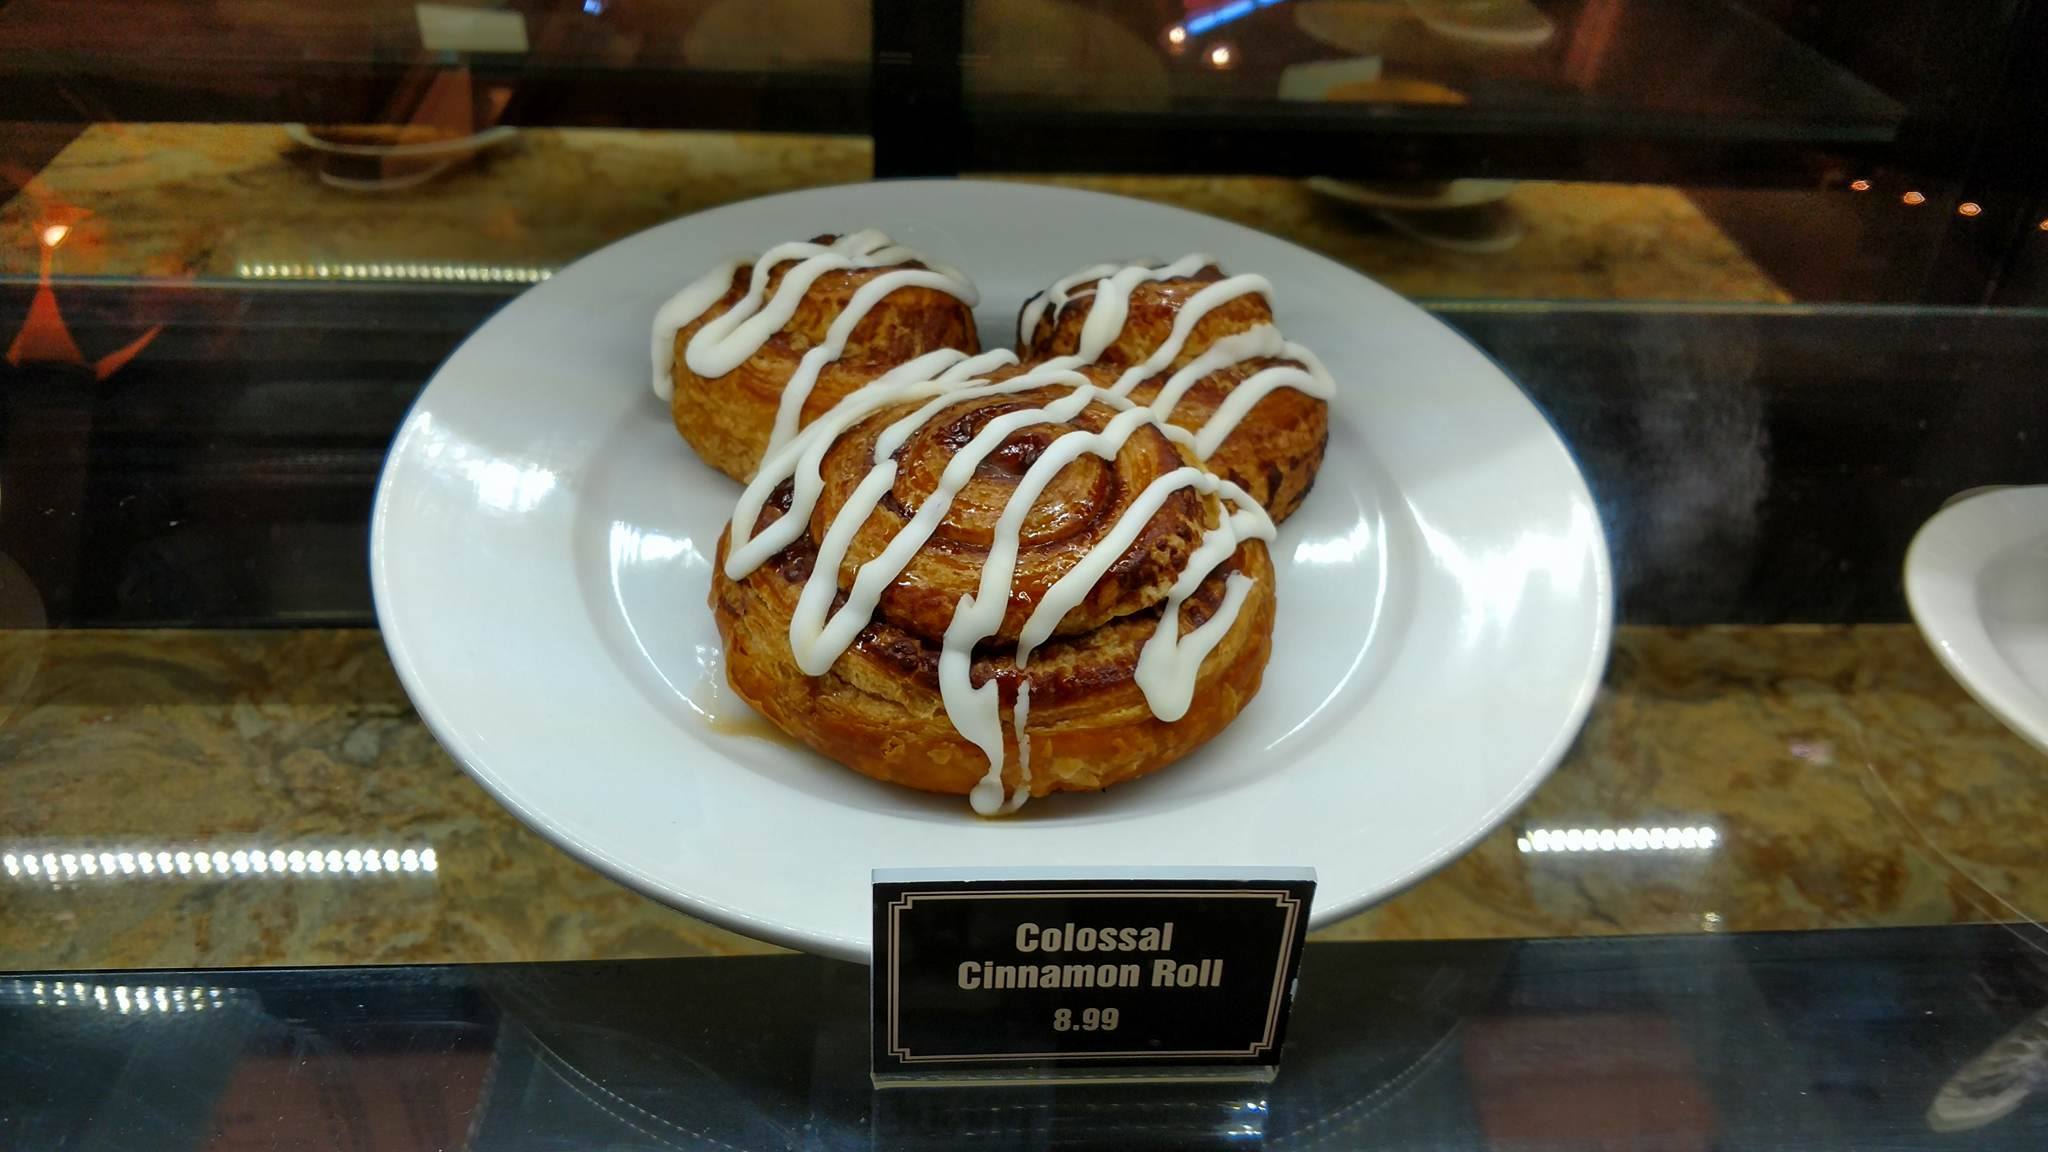 New Delicious Desserts Being Offered in the month of May at Walt Disney World